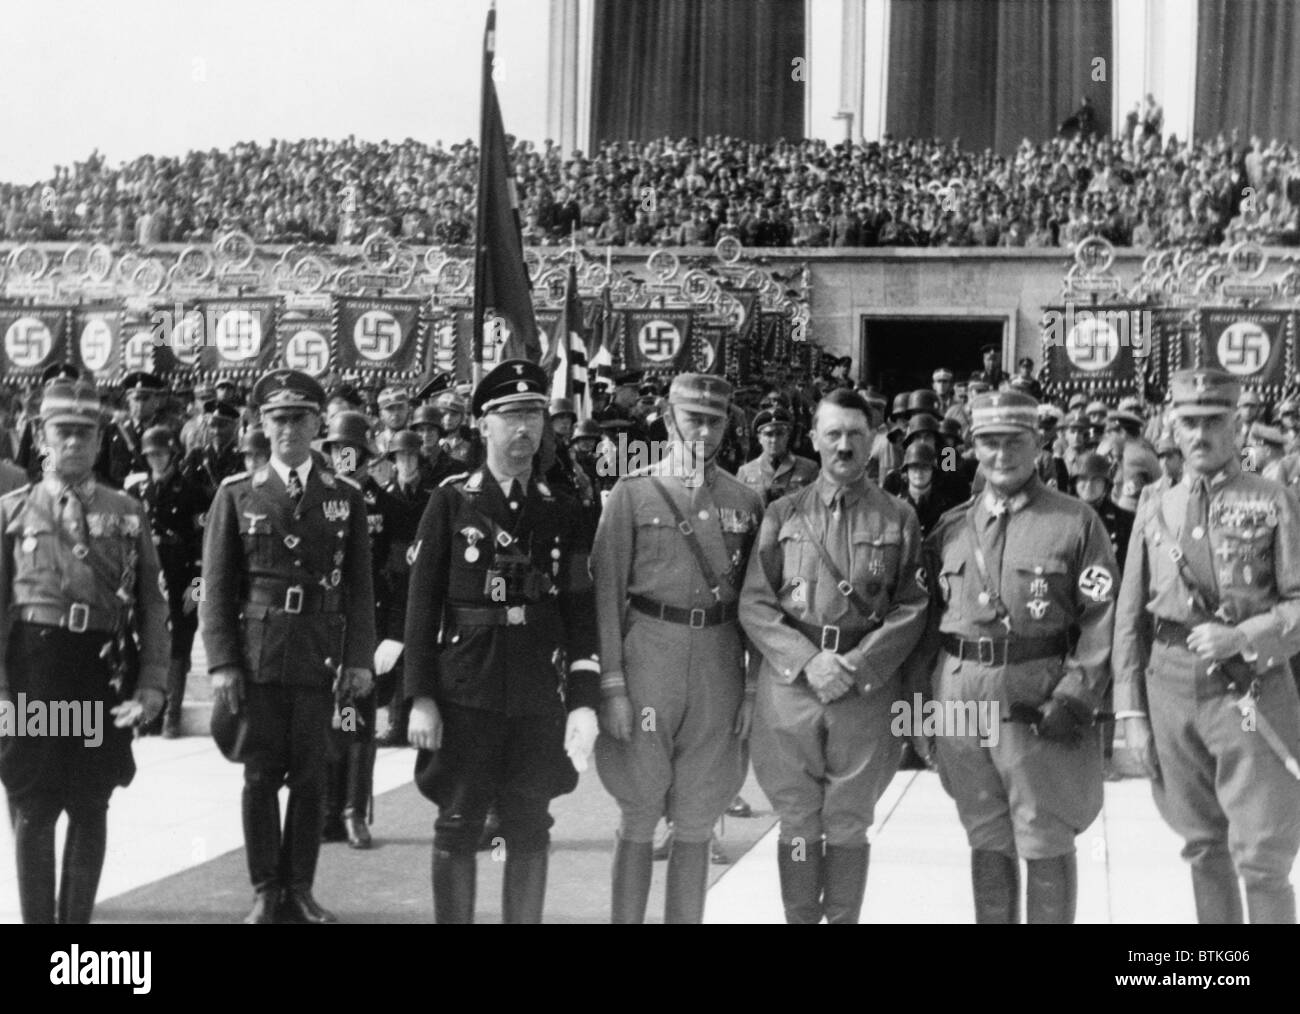 Adolf Hitler posed with Heinrich Himmler (third from left), Hermann Goring (second from right), and other Nazi officers in front of crowd, celebrating the Day of the Storm Troops, Nazi Party Day, Nuremberg. September 1935. Stock Photo